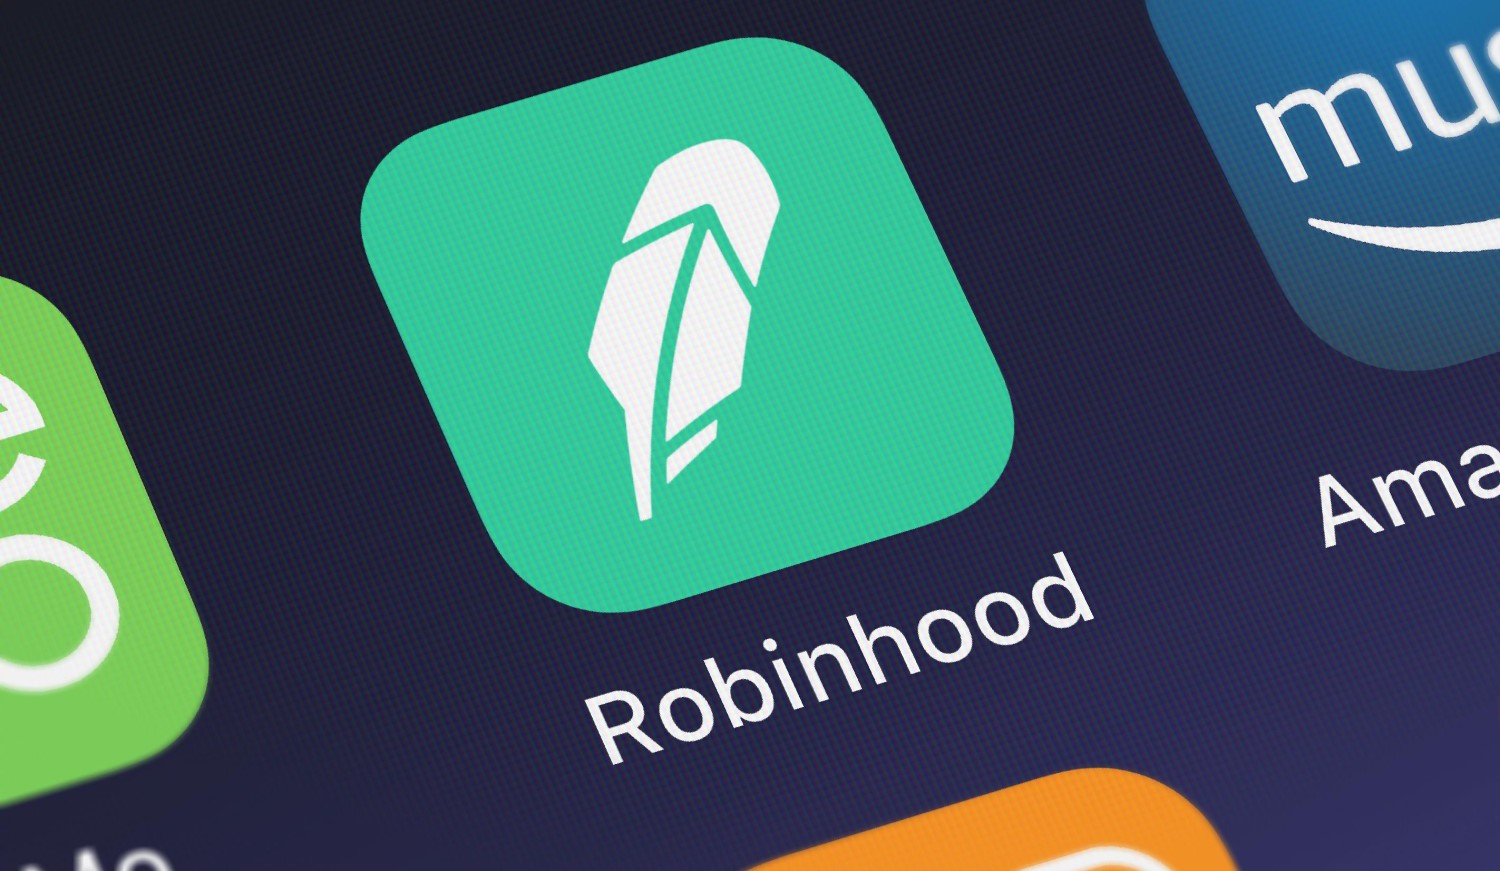 Investment App Robinhood Wins License To Operate In UK